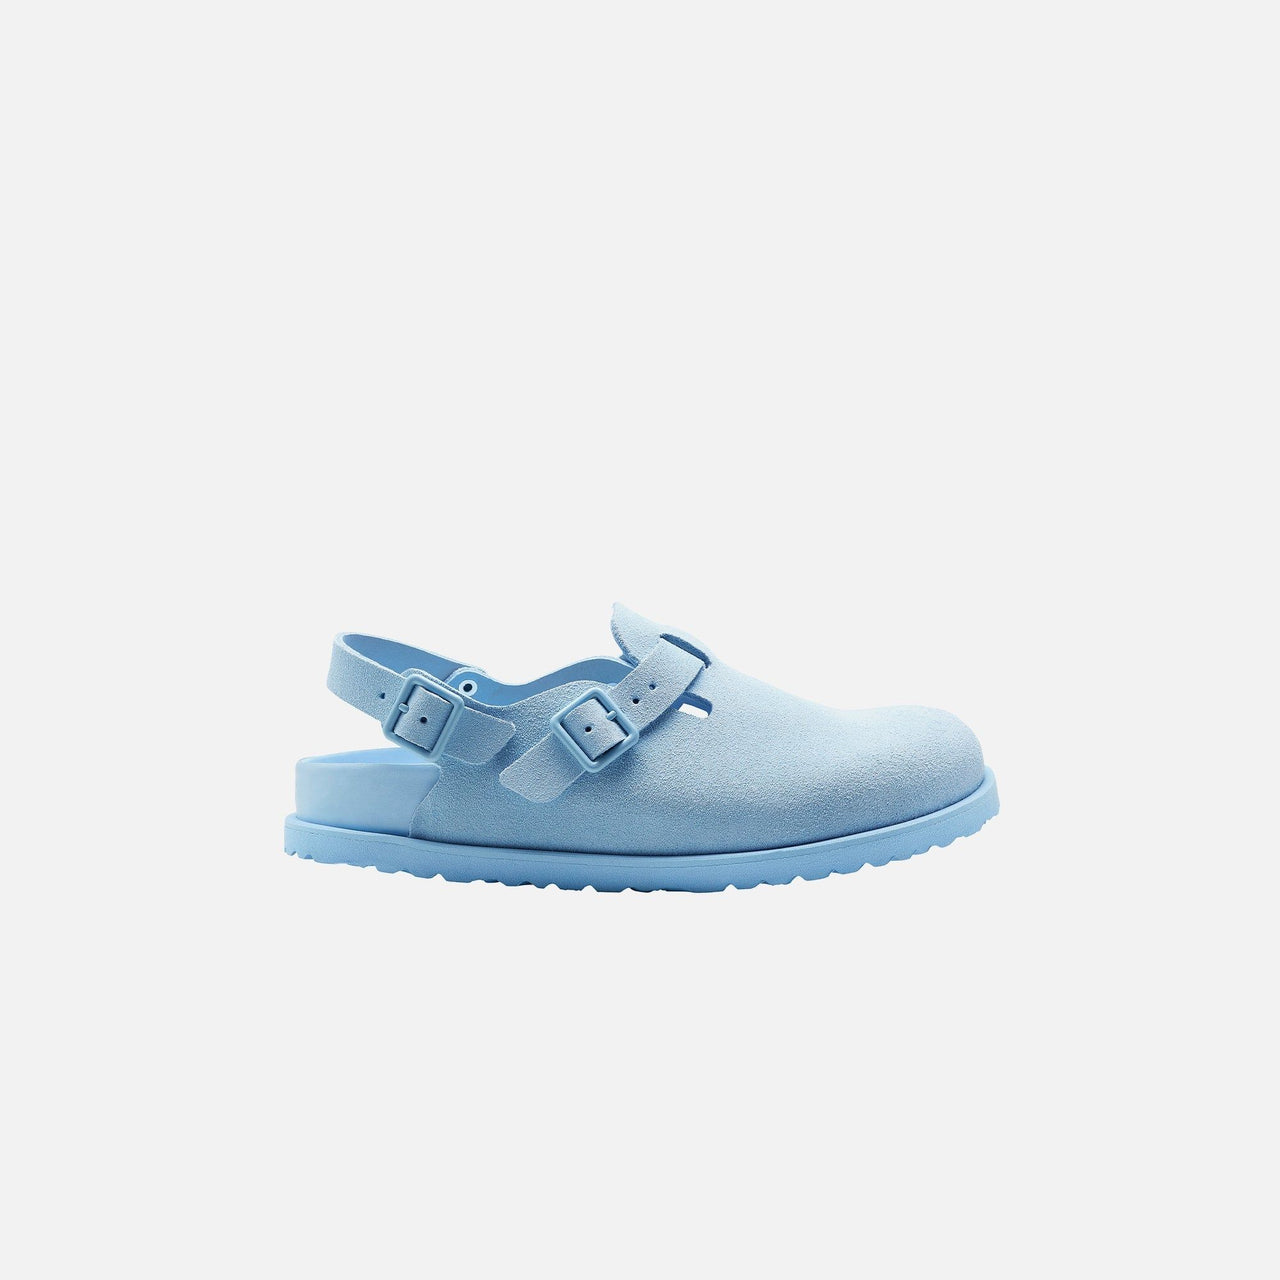 Birkenstock Tokio Suede Leather Powder Blue shoe from front angle